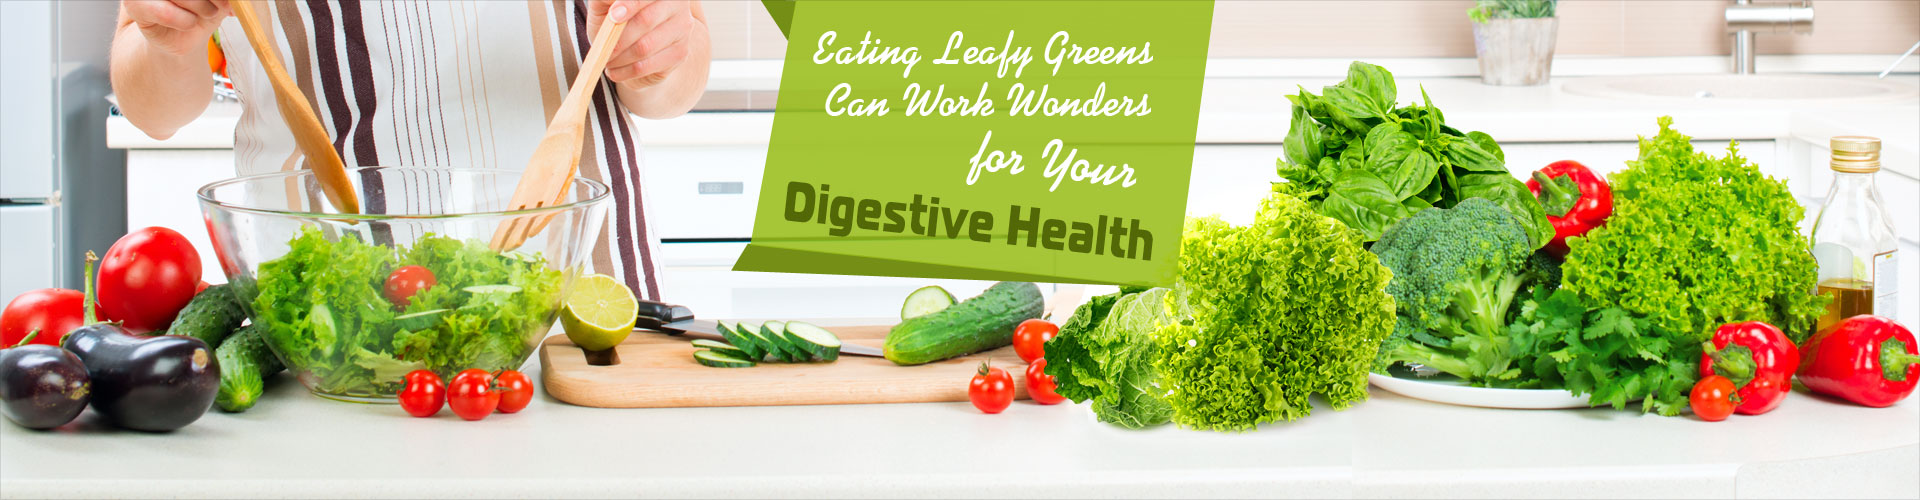 Eating Leafy Greens Can Work Wonders for Your Digestive Health